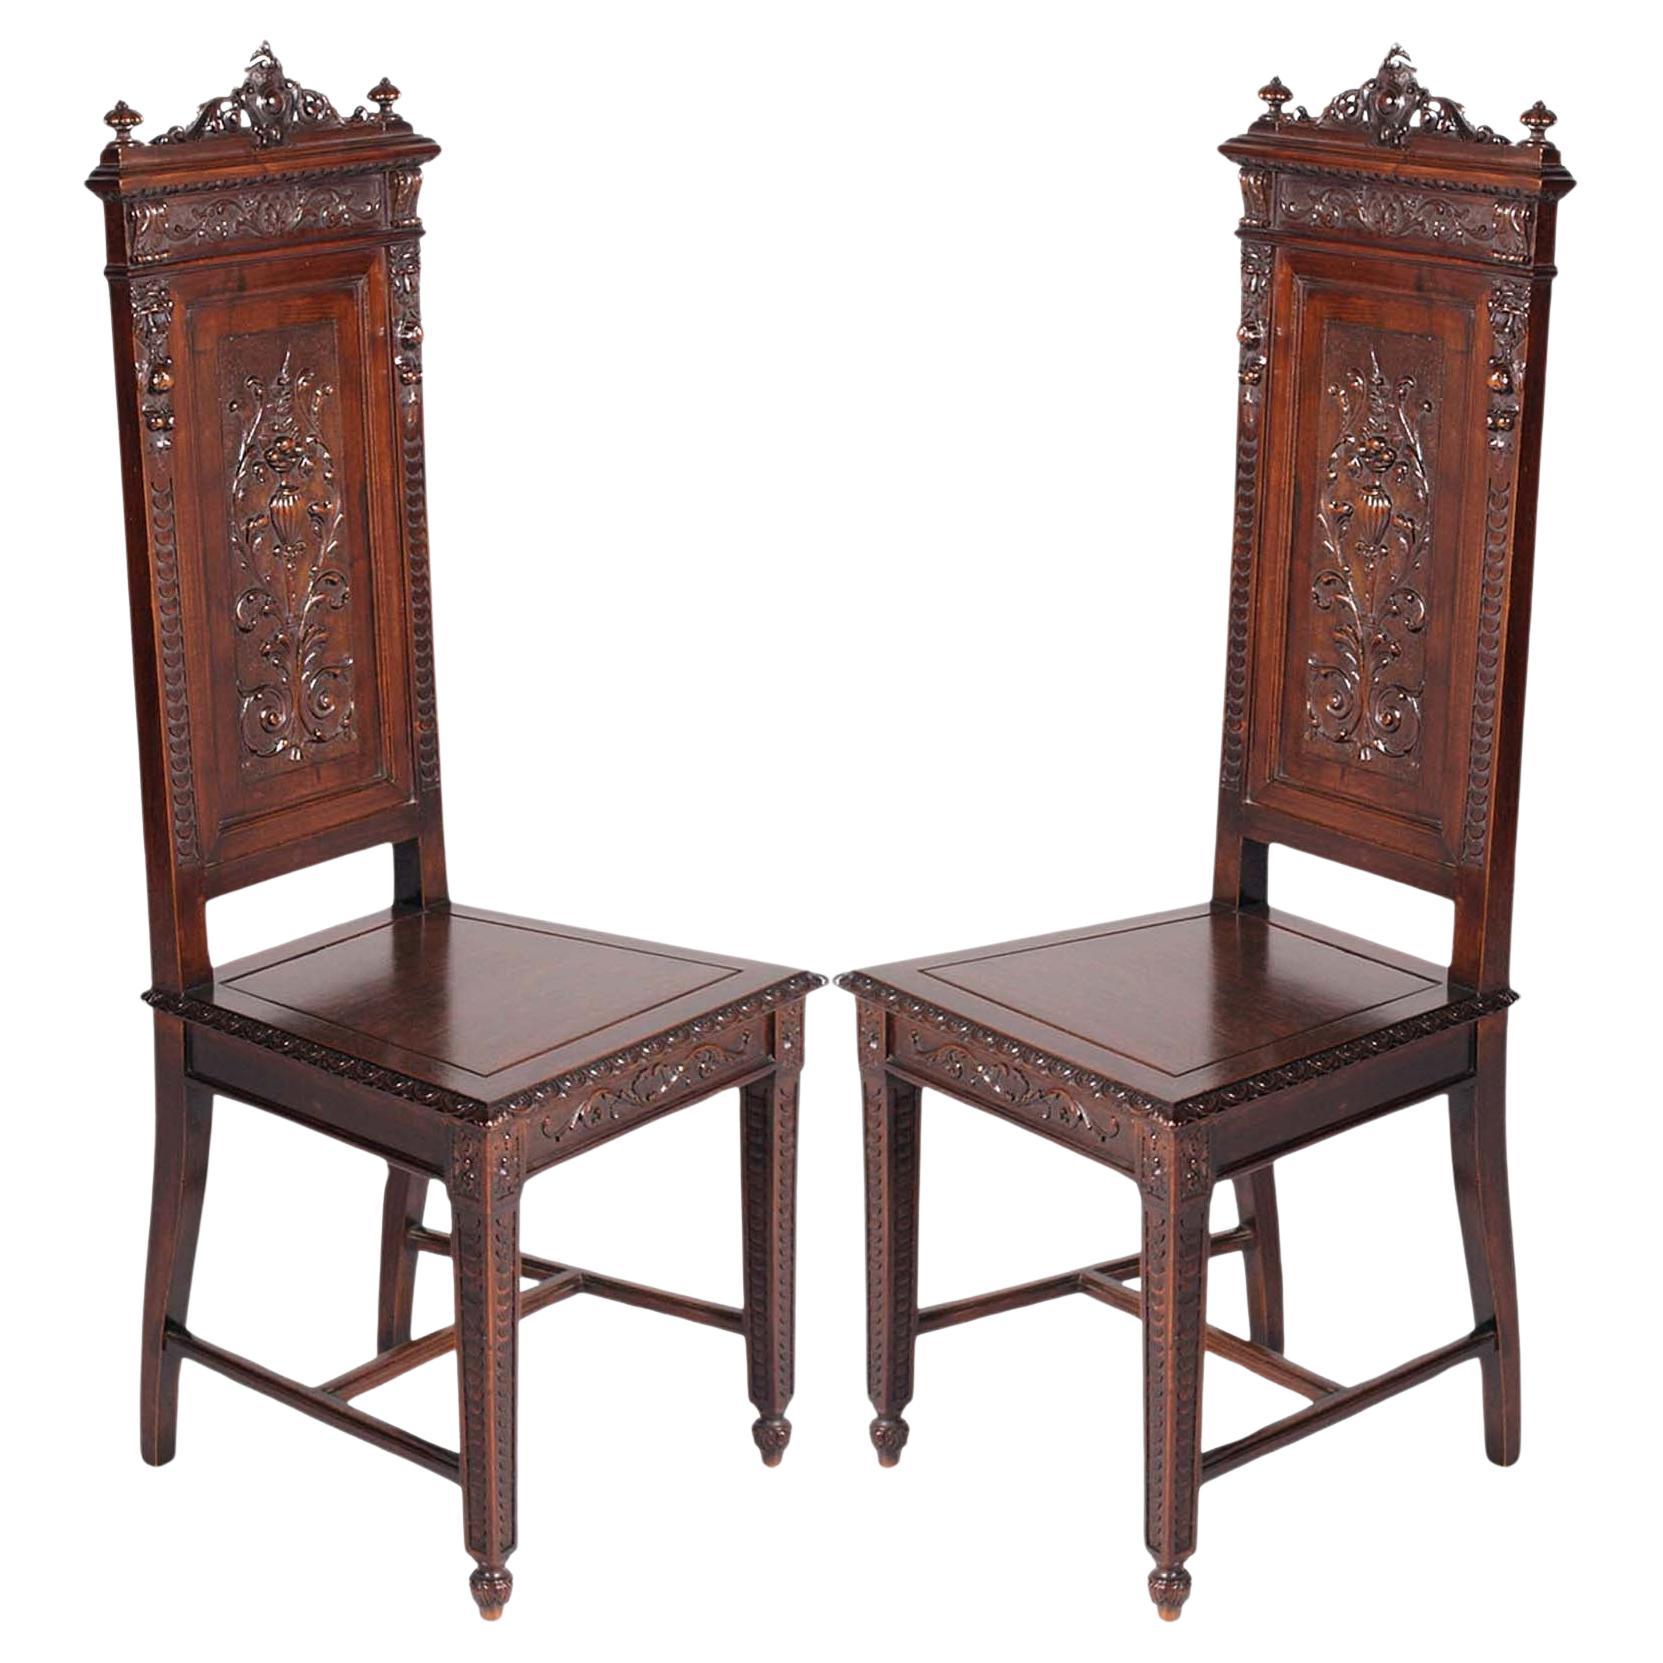 Early 20th Century Pair Eclectic Venice Chairs in Walnut by Testolini Frères For Sale